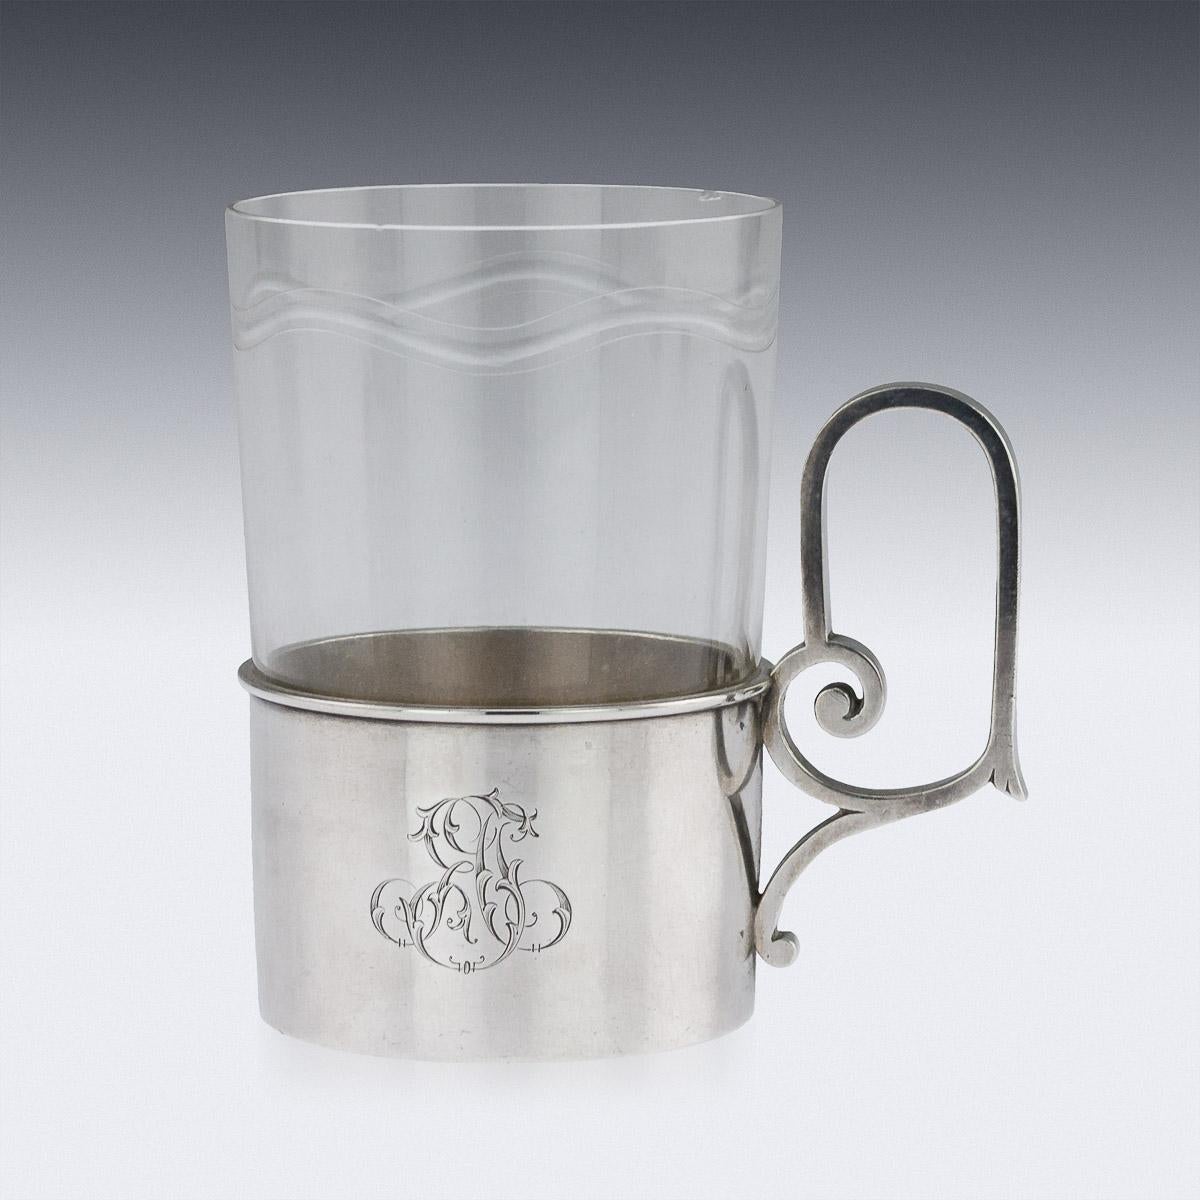 Antique 19th century Russian Faberge solid silver tea glass holder, the plain polished surface engraved with elaborate Cyrillic initials YaG, applied with a solid arching scroll handle, and fitted with faceted glass cup. Hallmarked silver 88 (915